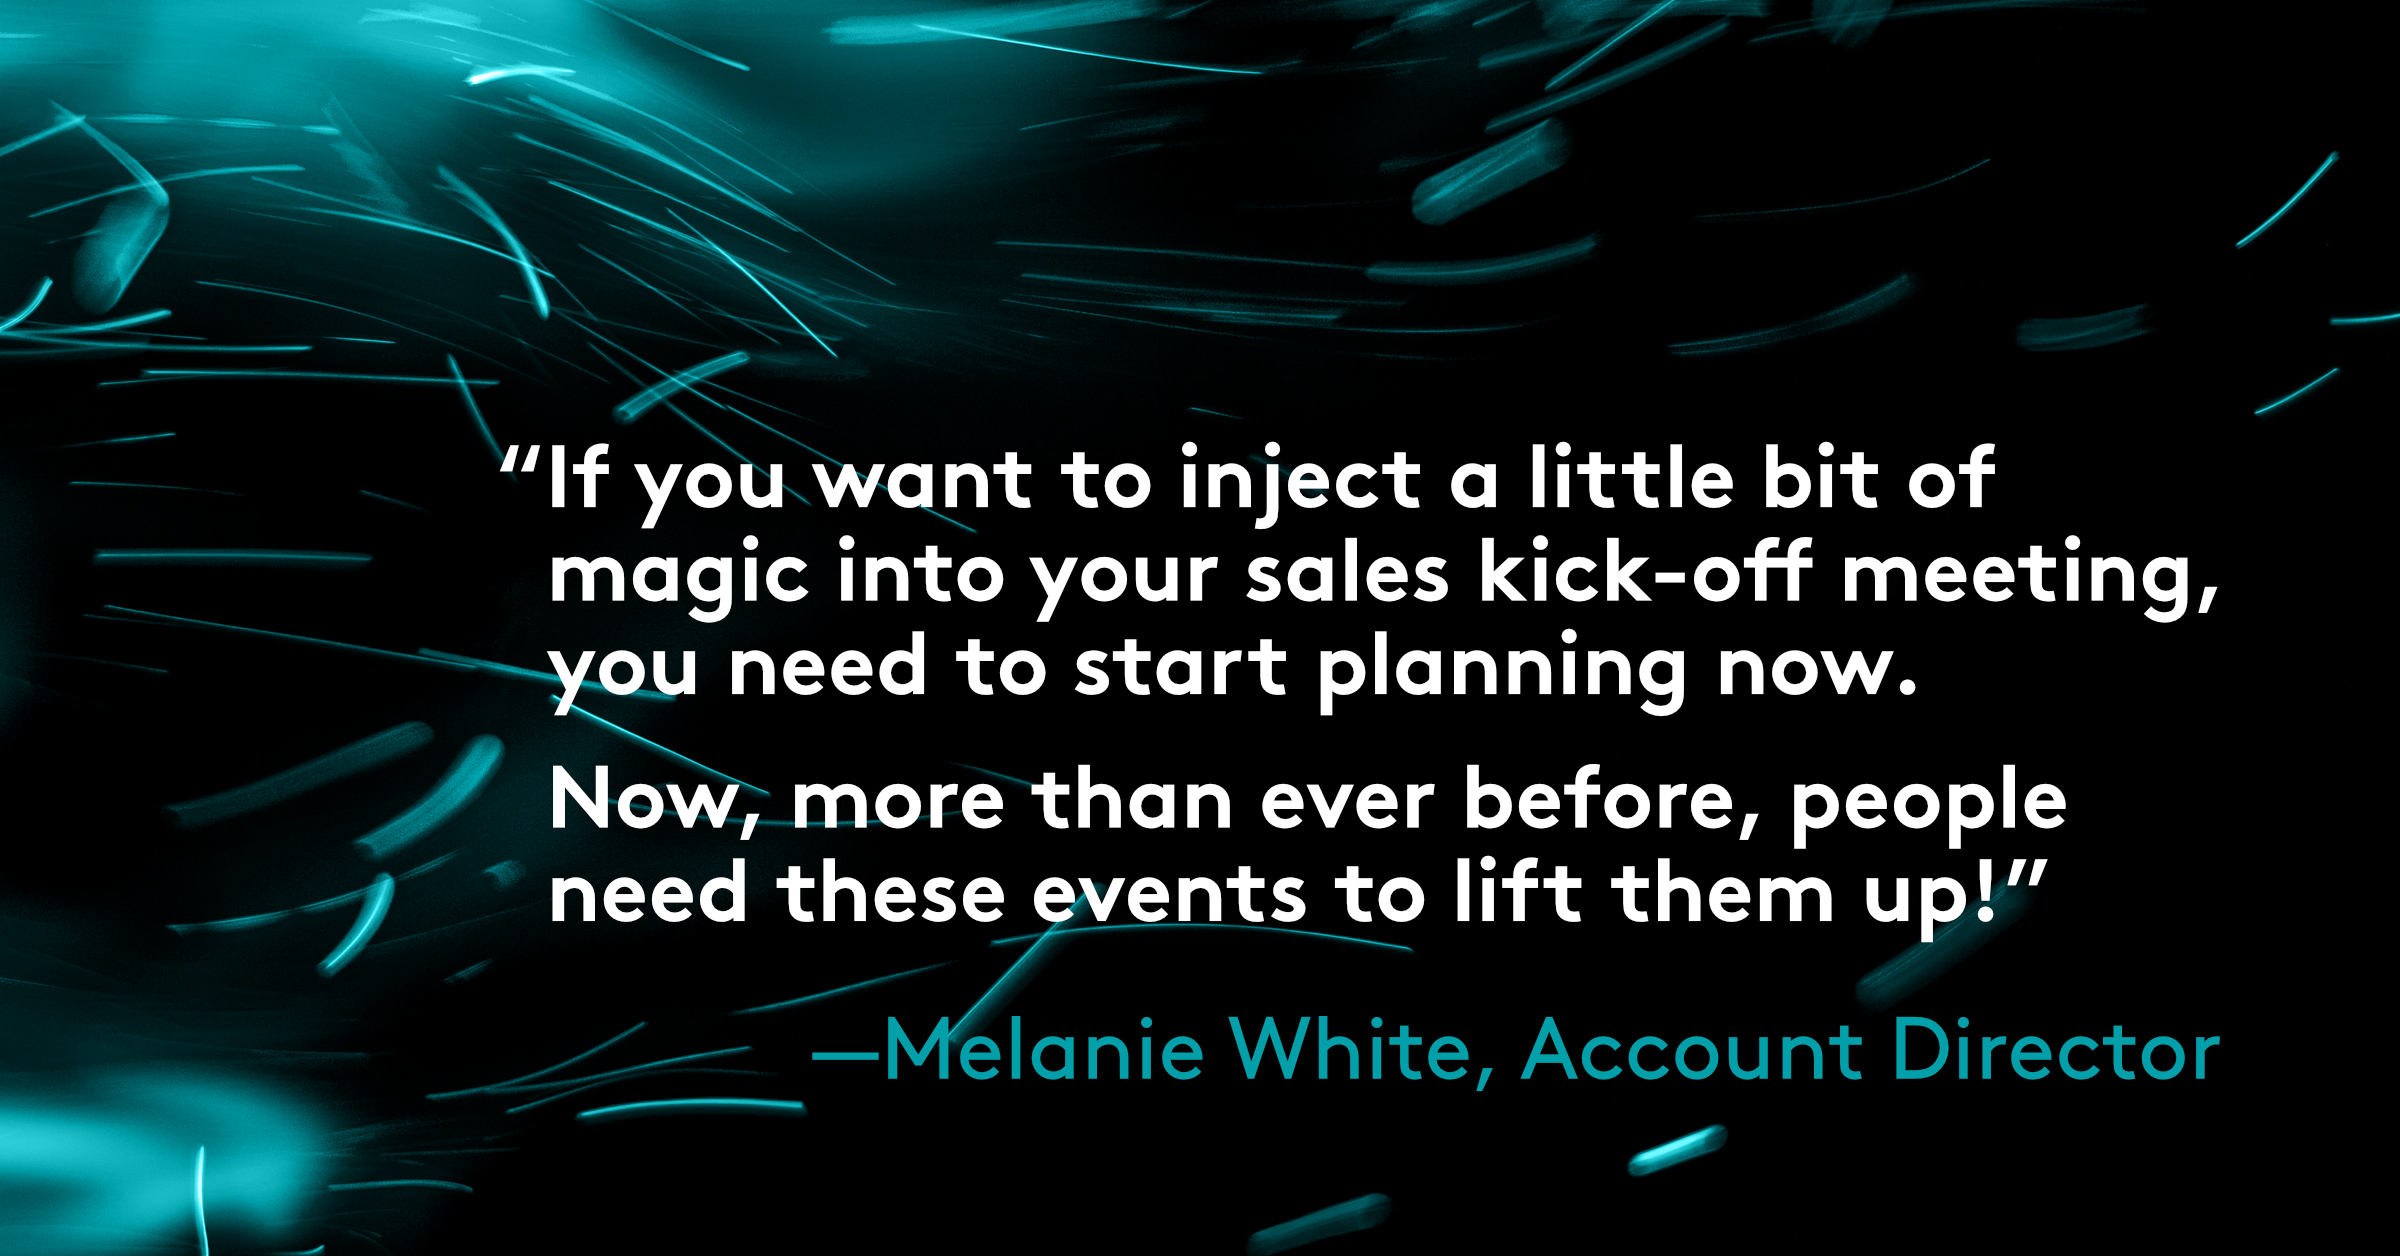 Injecting a little bit of magic into your Sales Kick-off Meeting